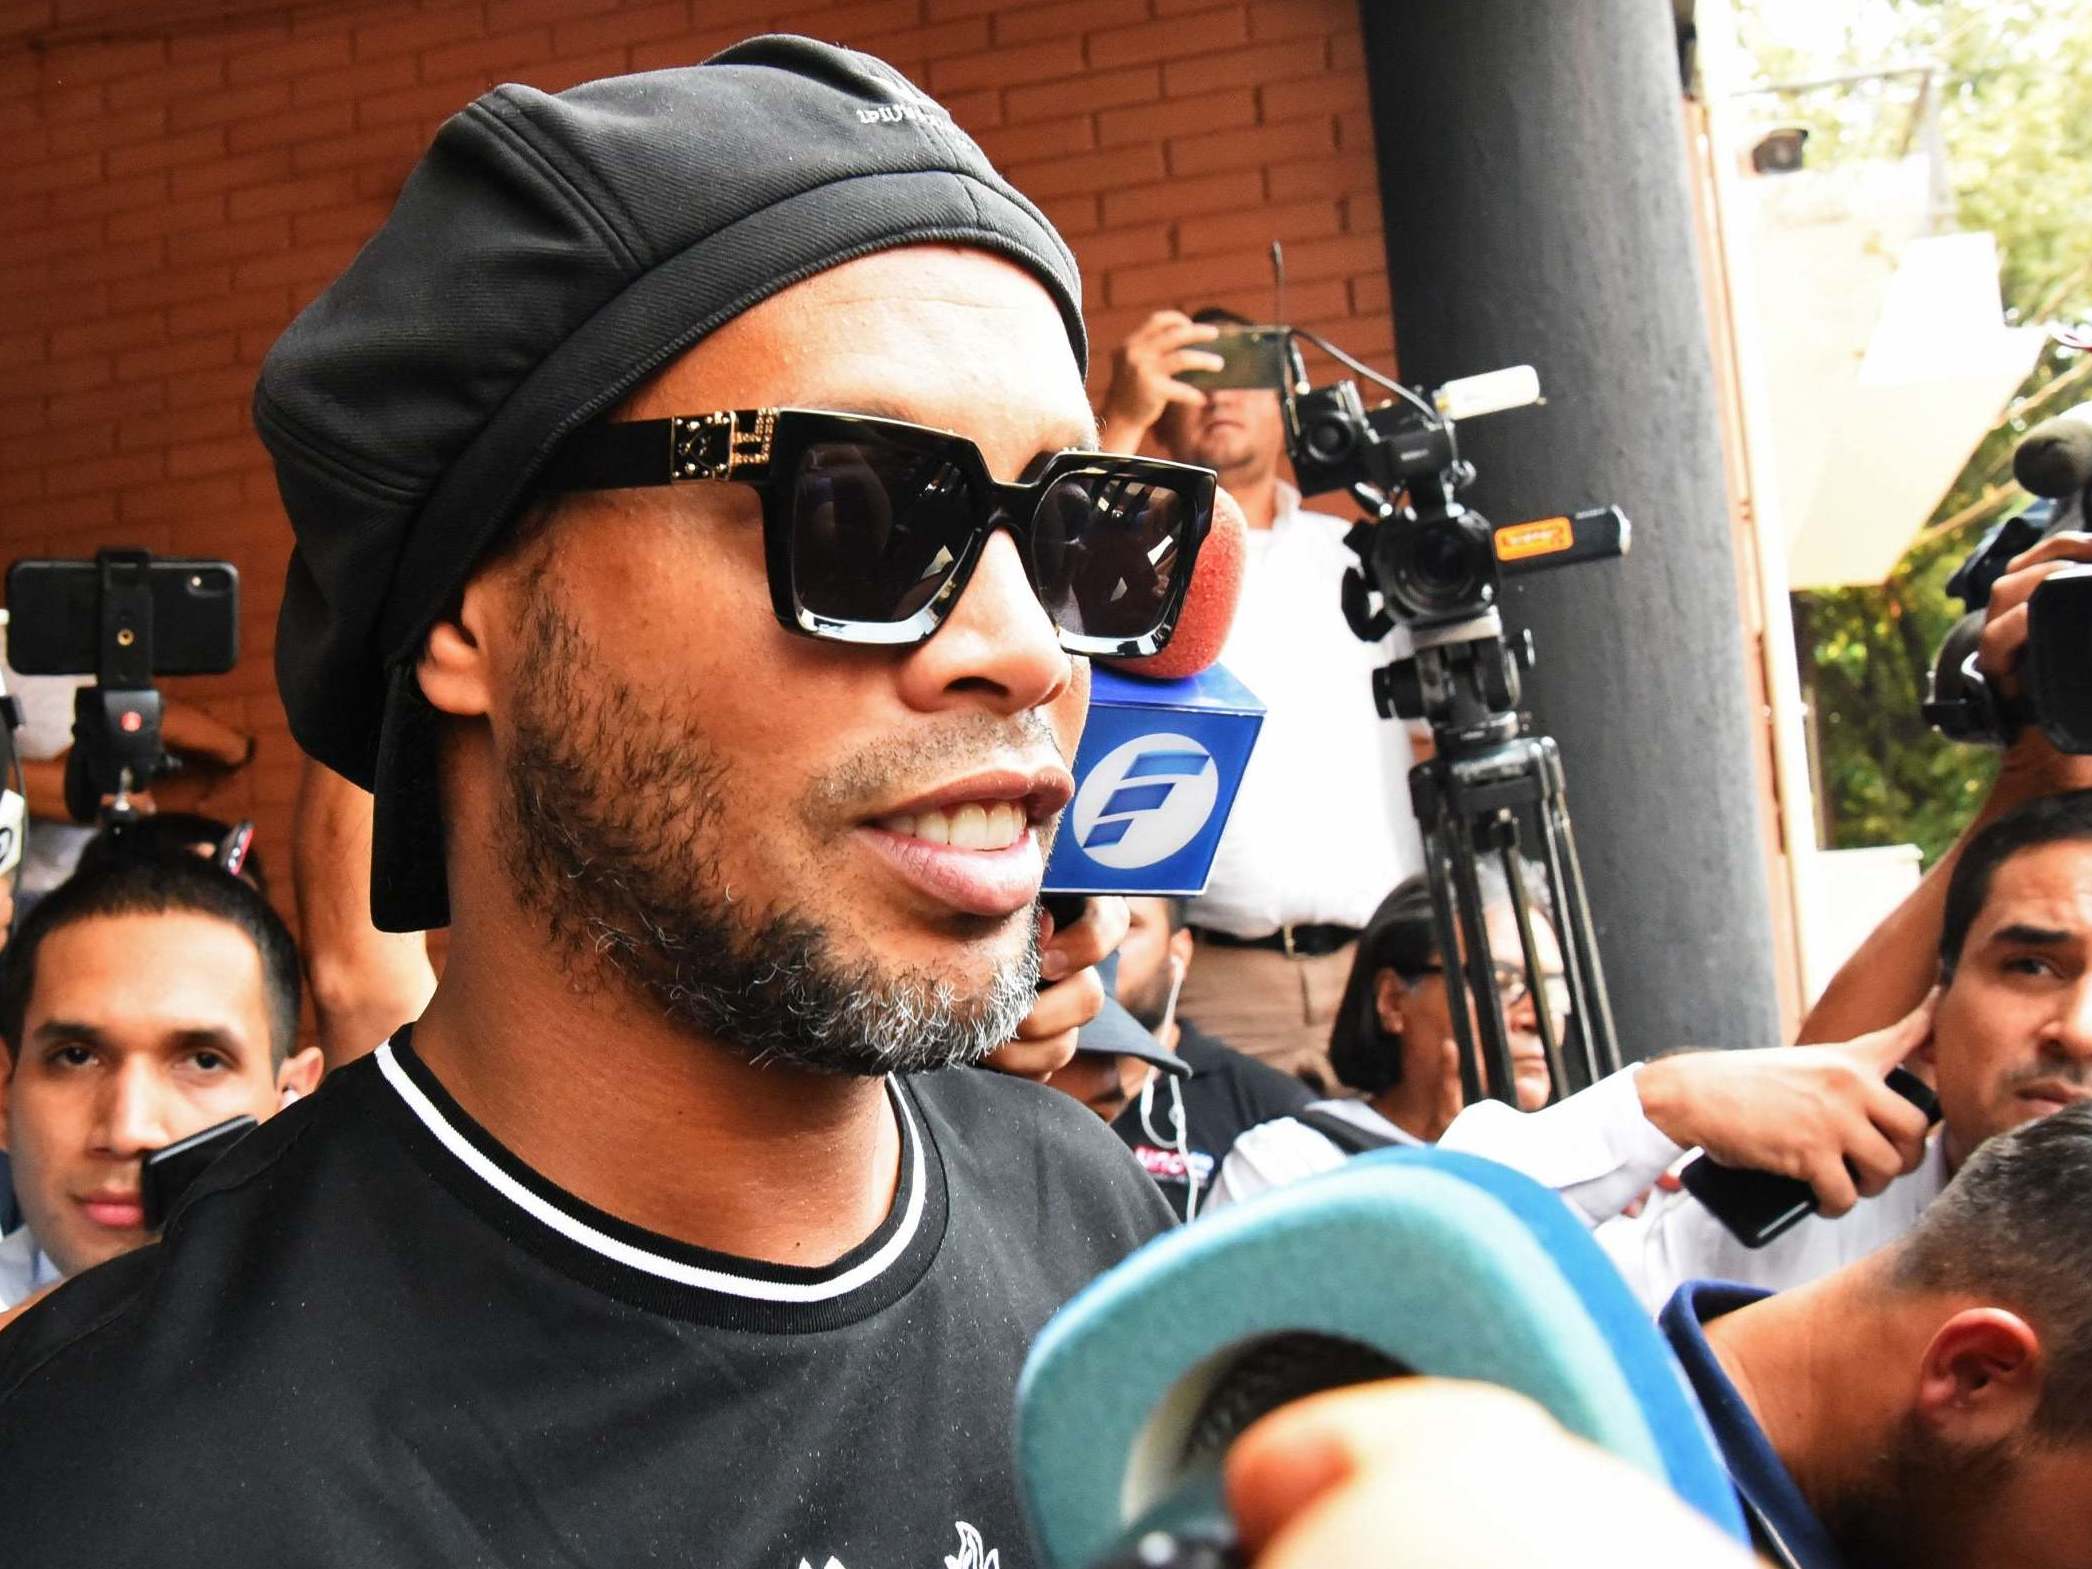 Ronaldinho is to be freed in adulterated passport case